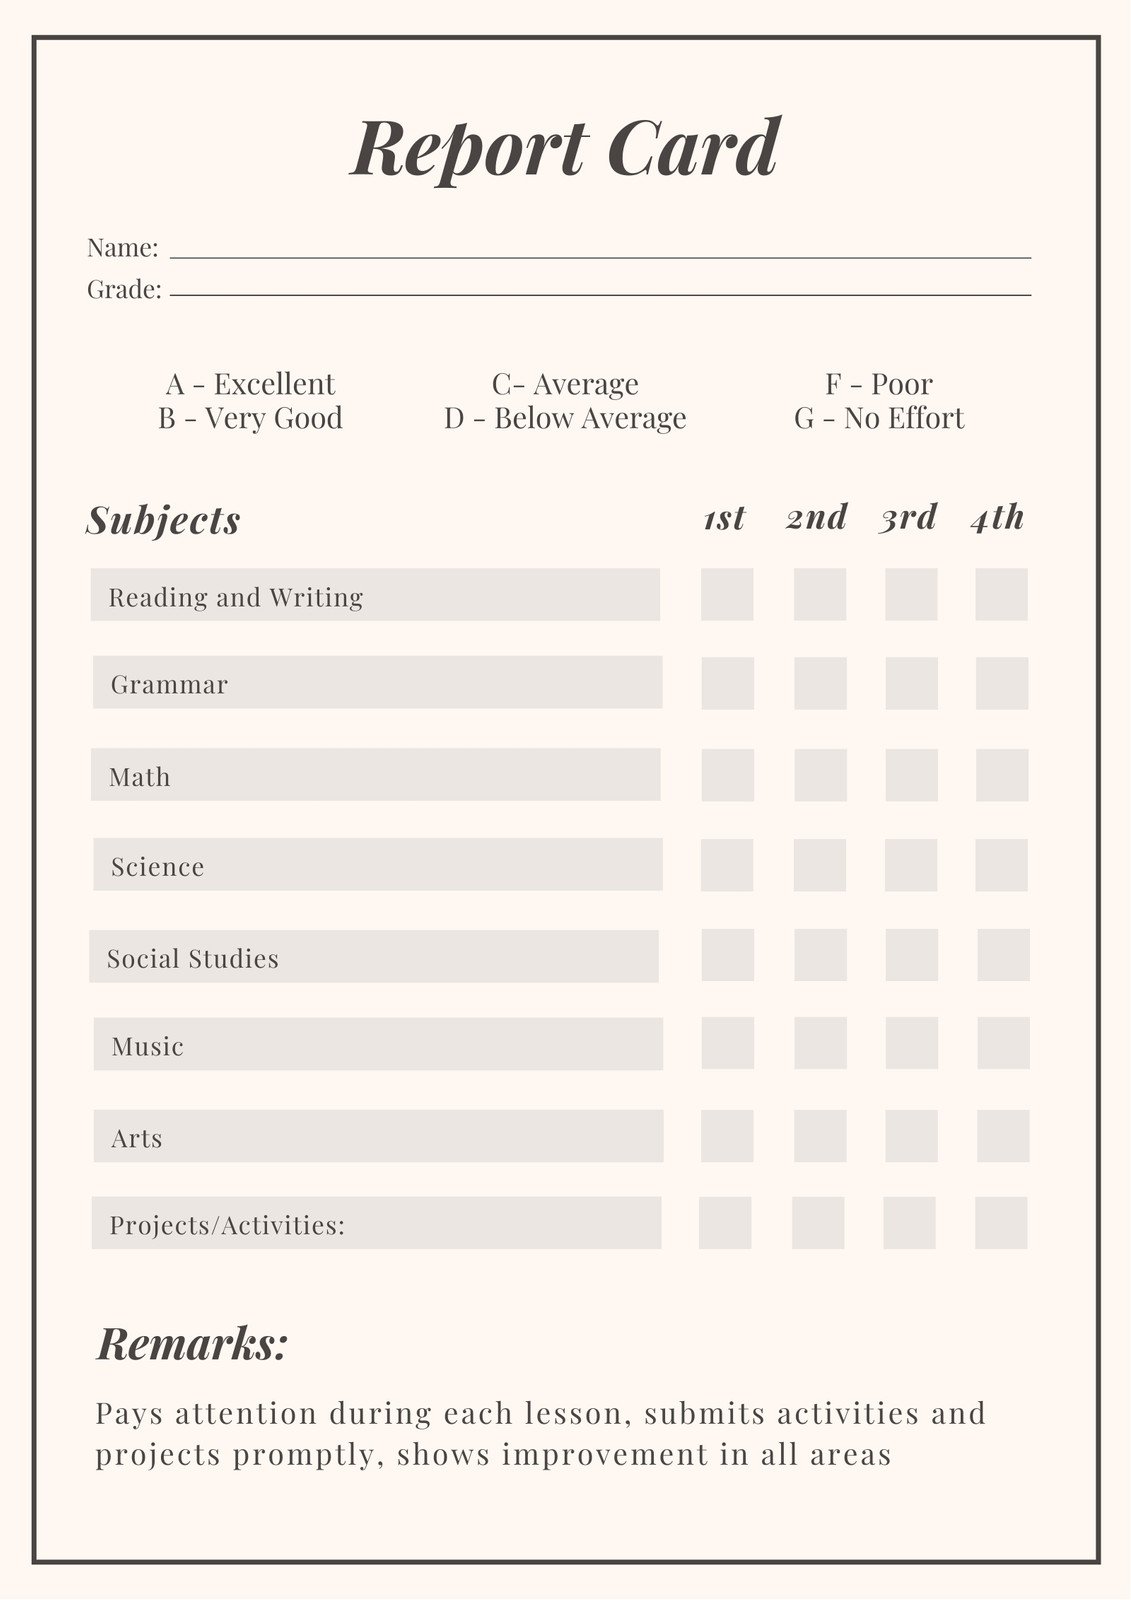 Free, printable, customizable report card templates  Canva For Report Card Template Middle School